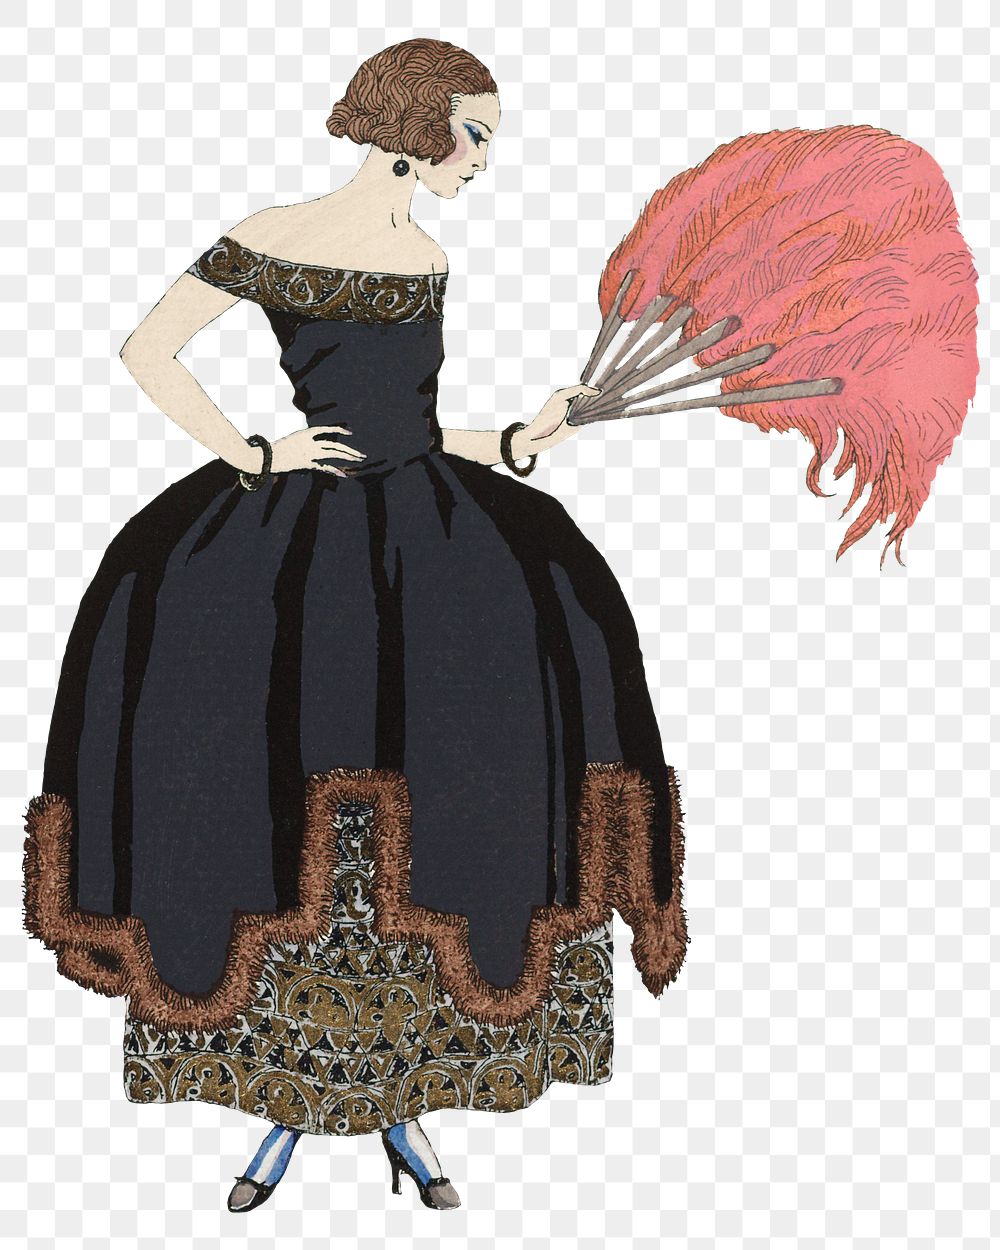 1920s Victorian dress fashion png, remix from artworks by George Barbier